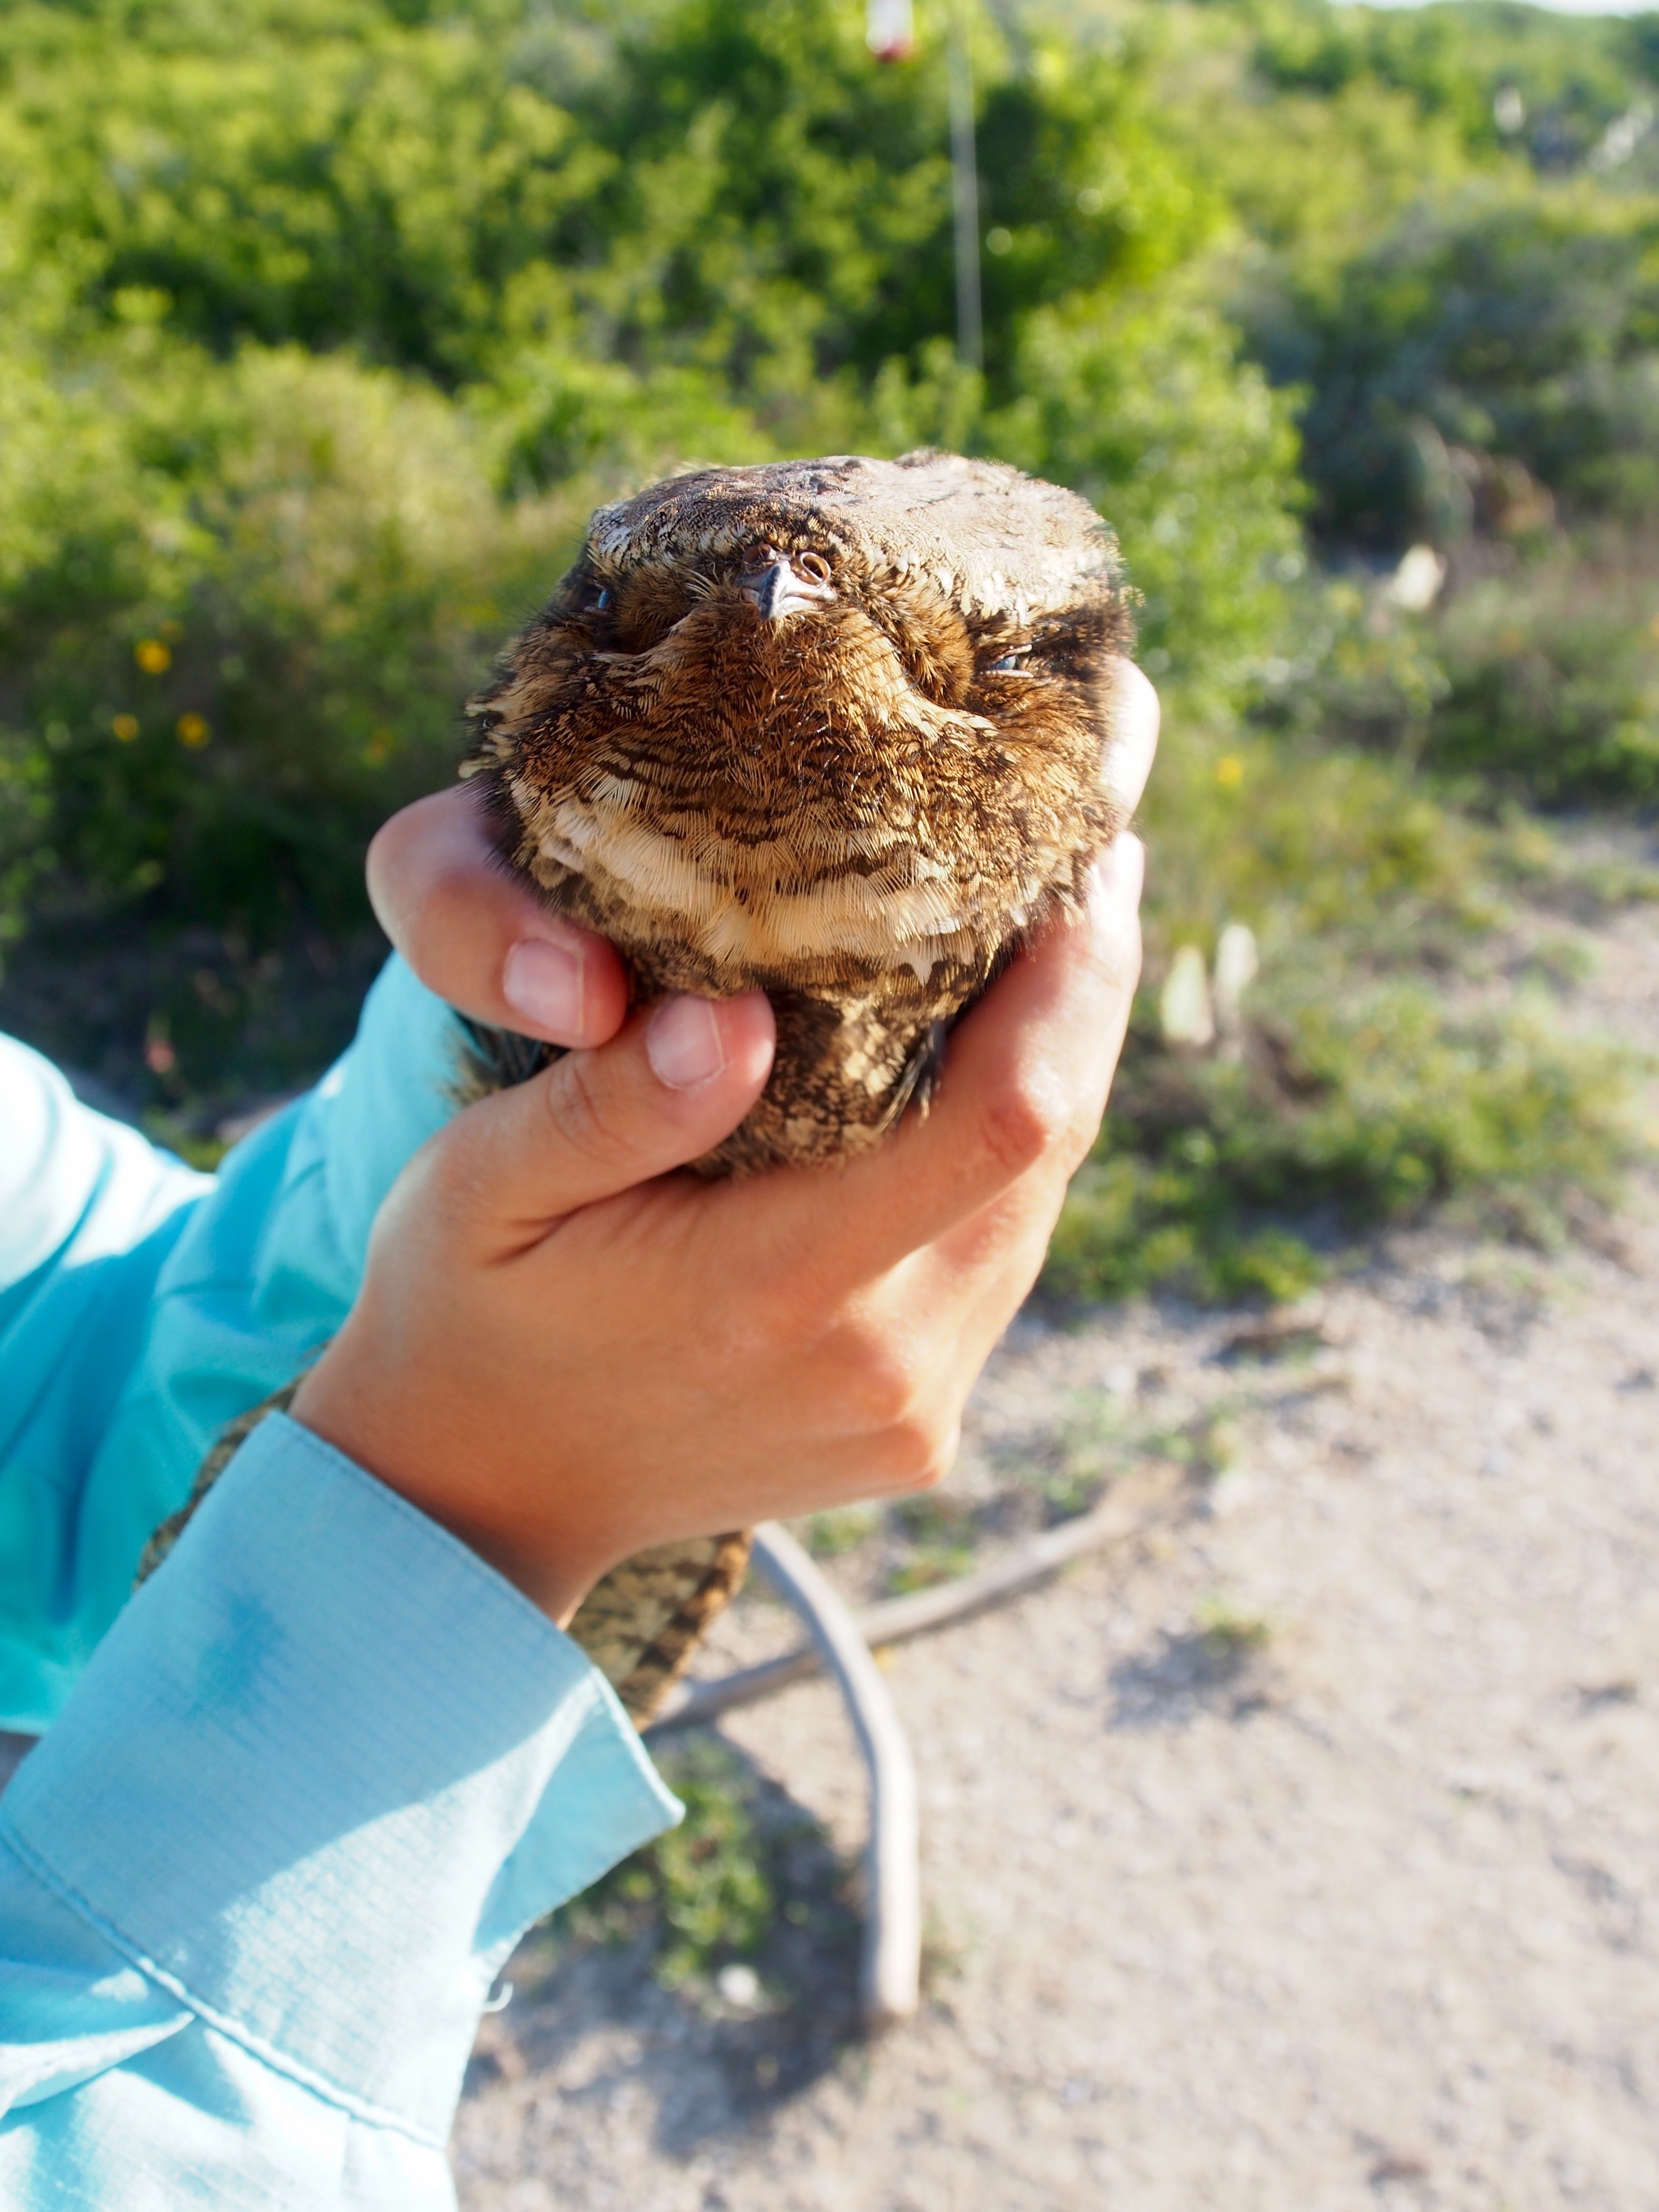 A chuck-will's-widow bird being held by a scientist